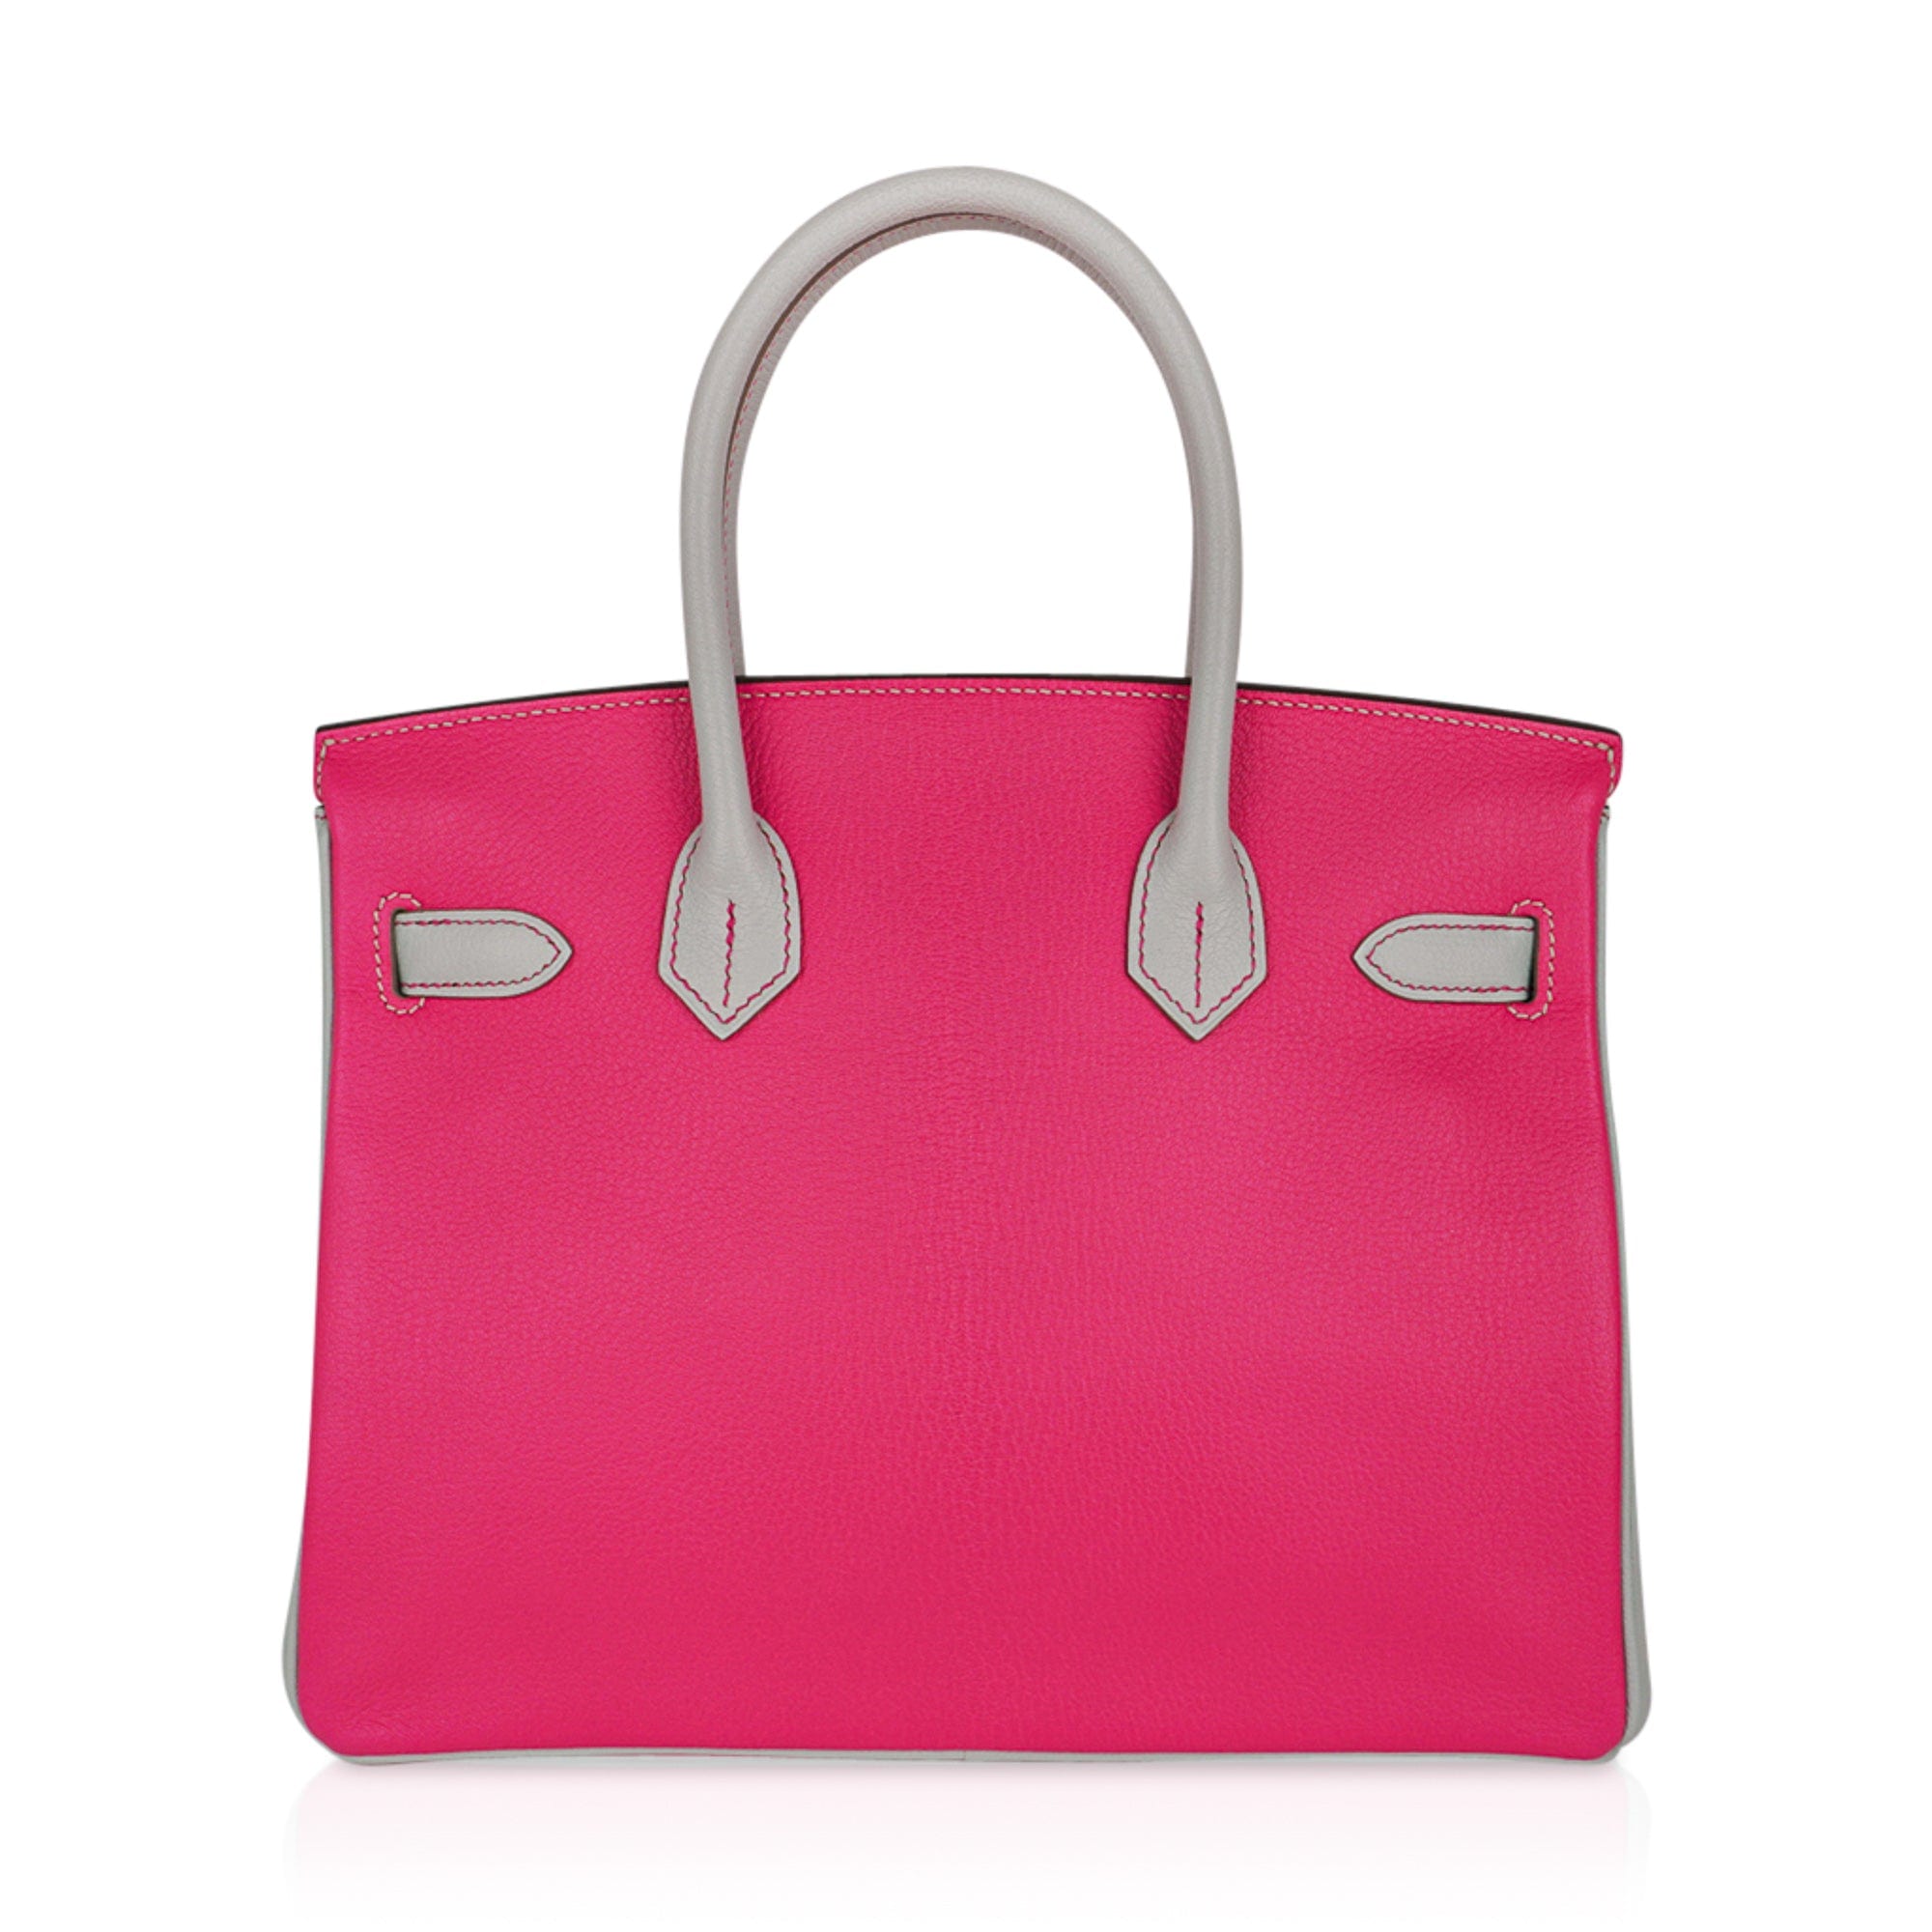 Hermes Special Order HSS Birkin 30 Bag in Rose Shocking and Gris Perle Chevre Leather with Gold Hardware